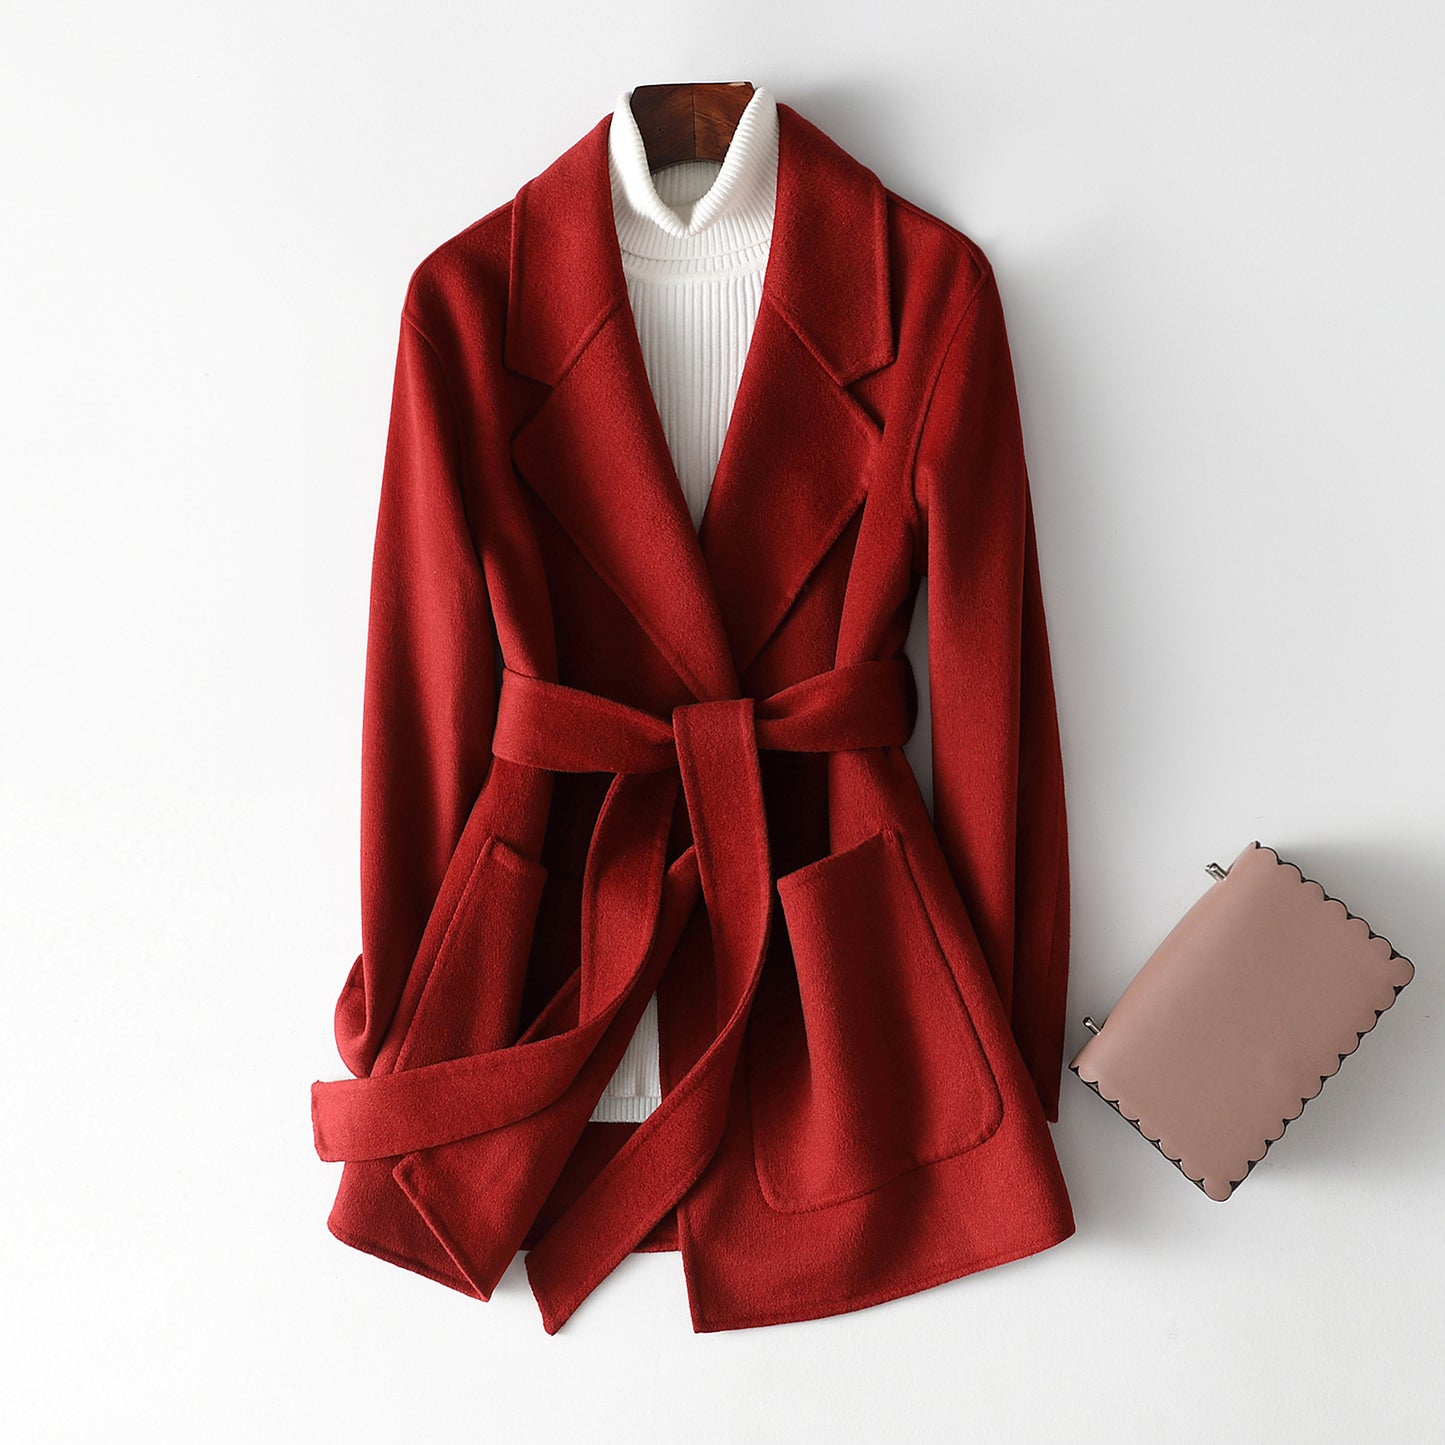 Chic Winter Outfits | Reversible Chic Cashmere Coat